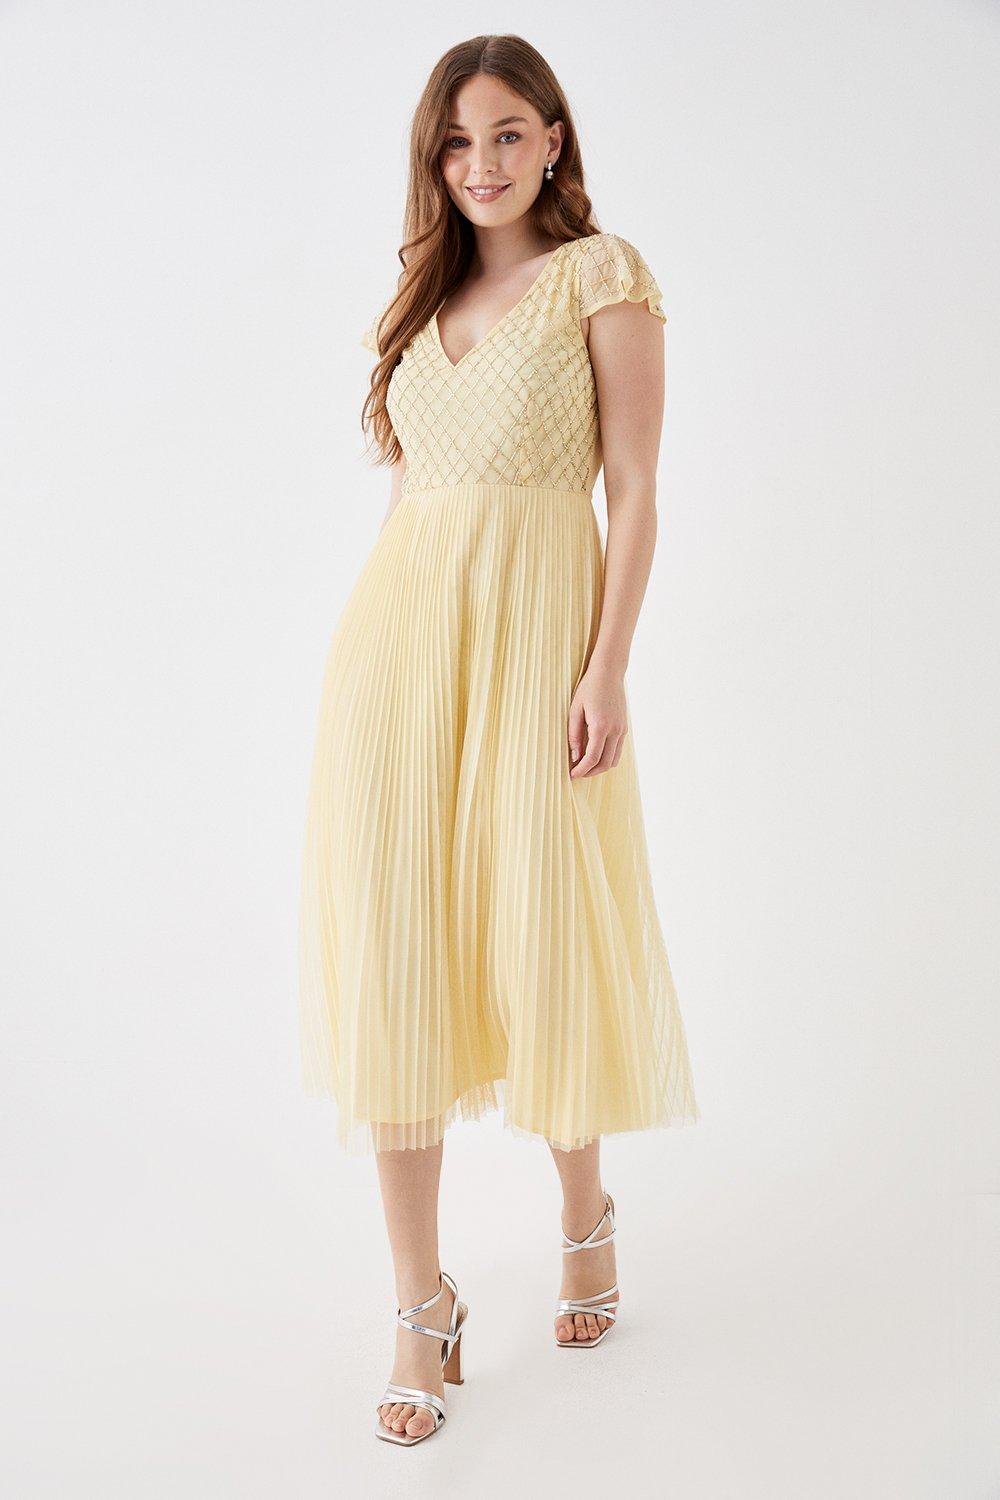 Debut Pleated Skirt Midi Dress With Embellished Bodice